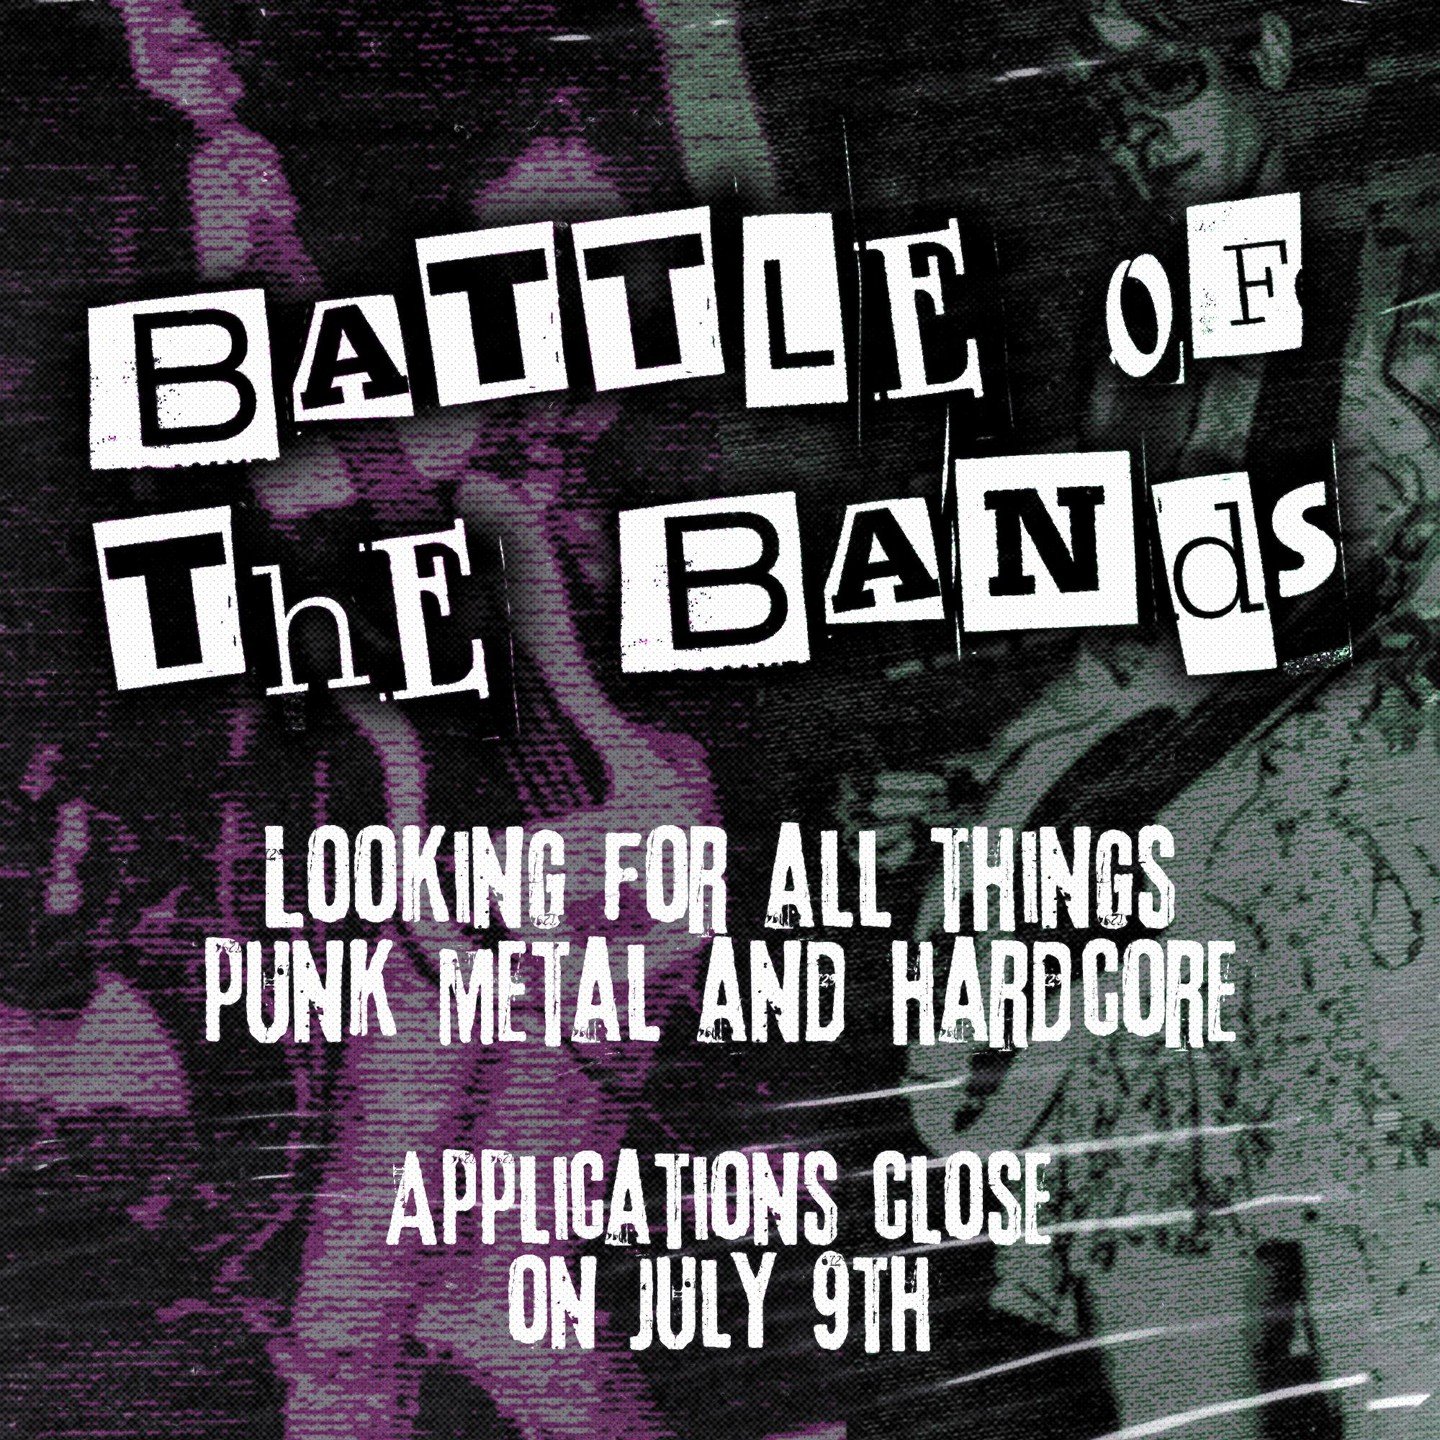 ITS THAT TIME! Artist Applications are now open for Battle of the Bands!🎸🎶 Deadline is July 9th. Link in Bio

💻 @camkingportfolio 
Producer: @kateelsishans